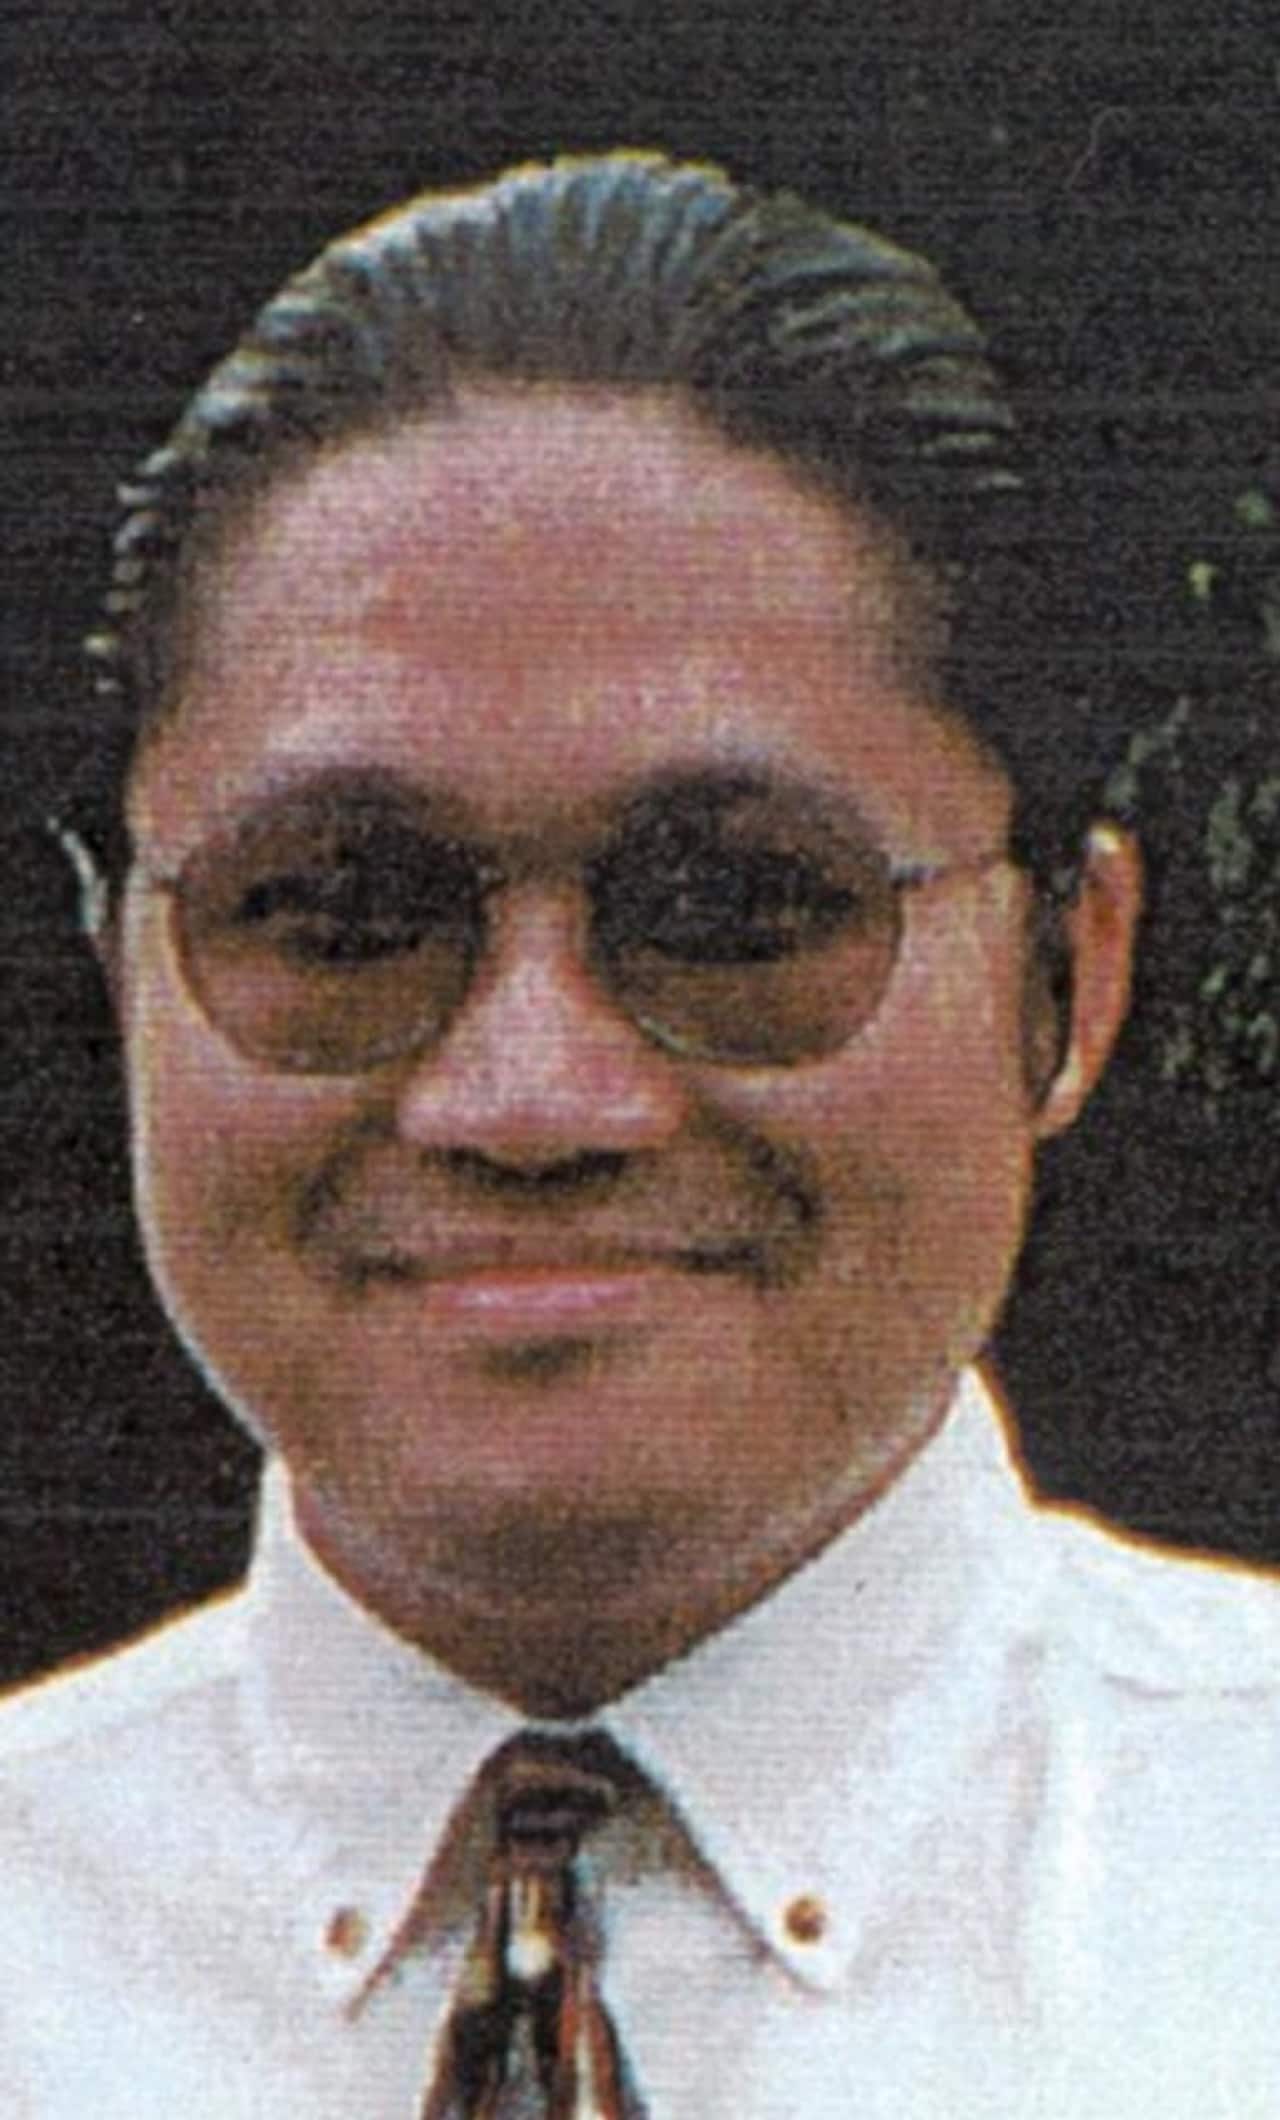 Mark Rebong of Newtown was killed while driving on I-84 in Danbury in 2000.